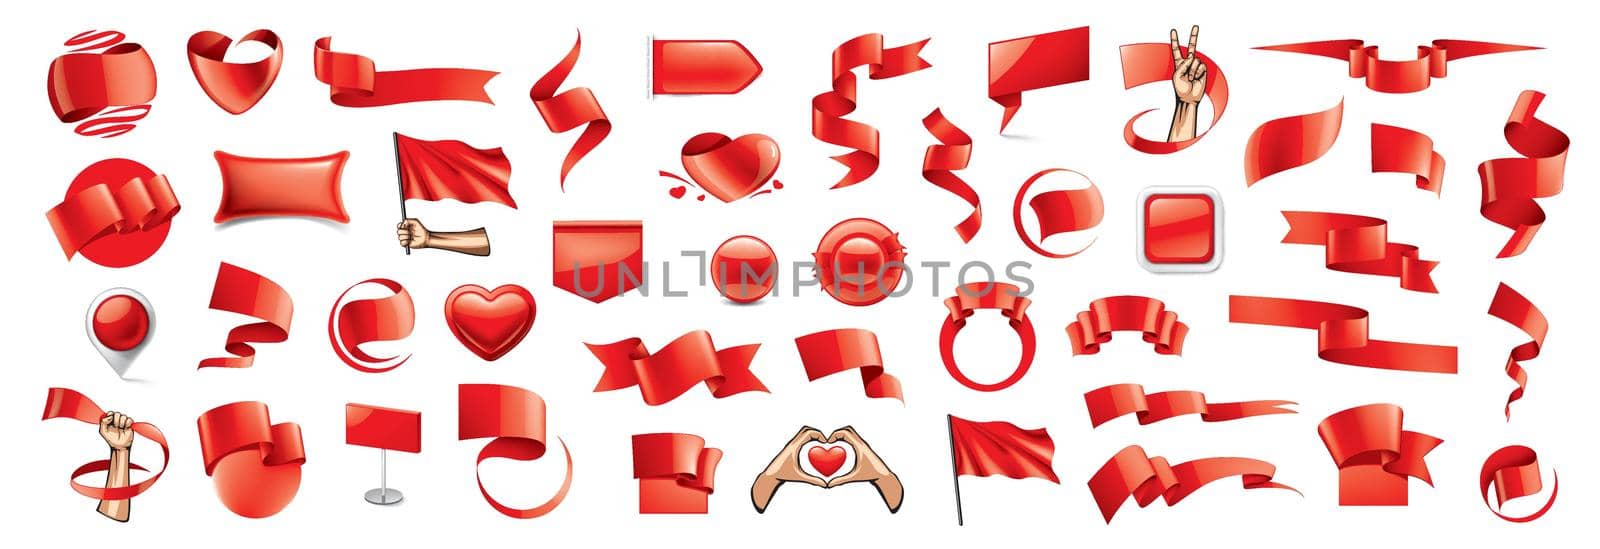 Large vector set of red flags, ribbons and various design elements by butenkow